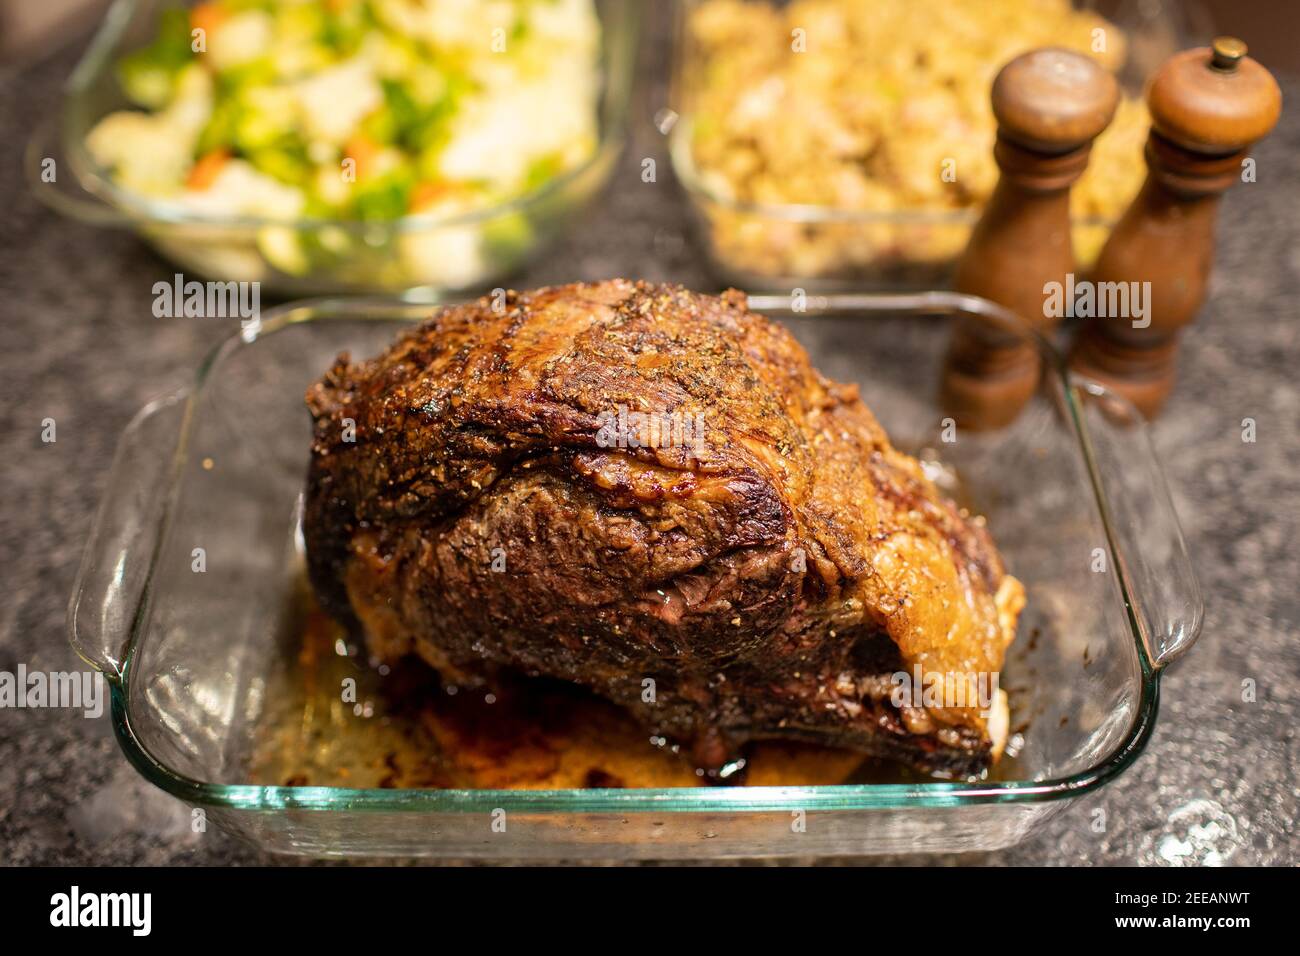 https://c8.alamy.com/comp/2EEANWT/prime-rib-roast-beef-dinner-with-salt-and-pepper-shakers-and-dishes-in-the-background-2EEANWT.jpg